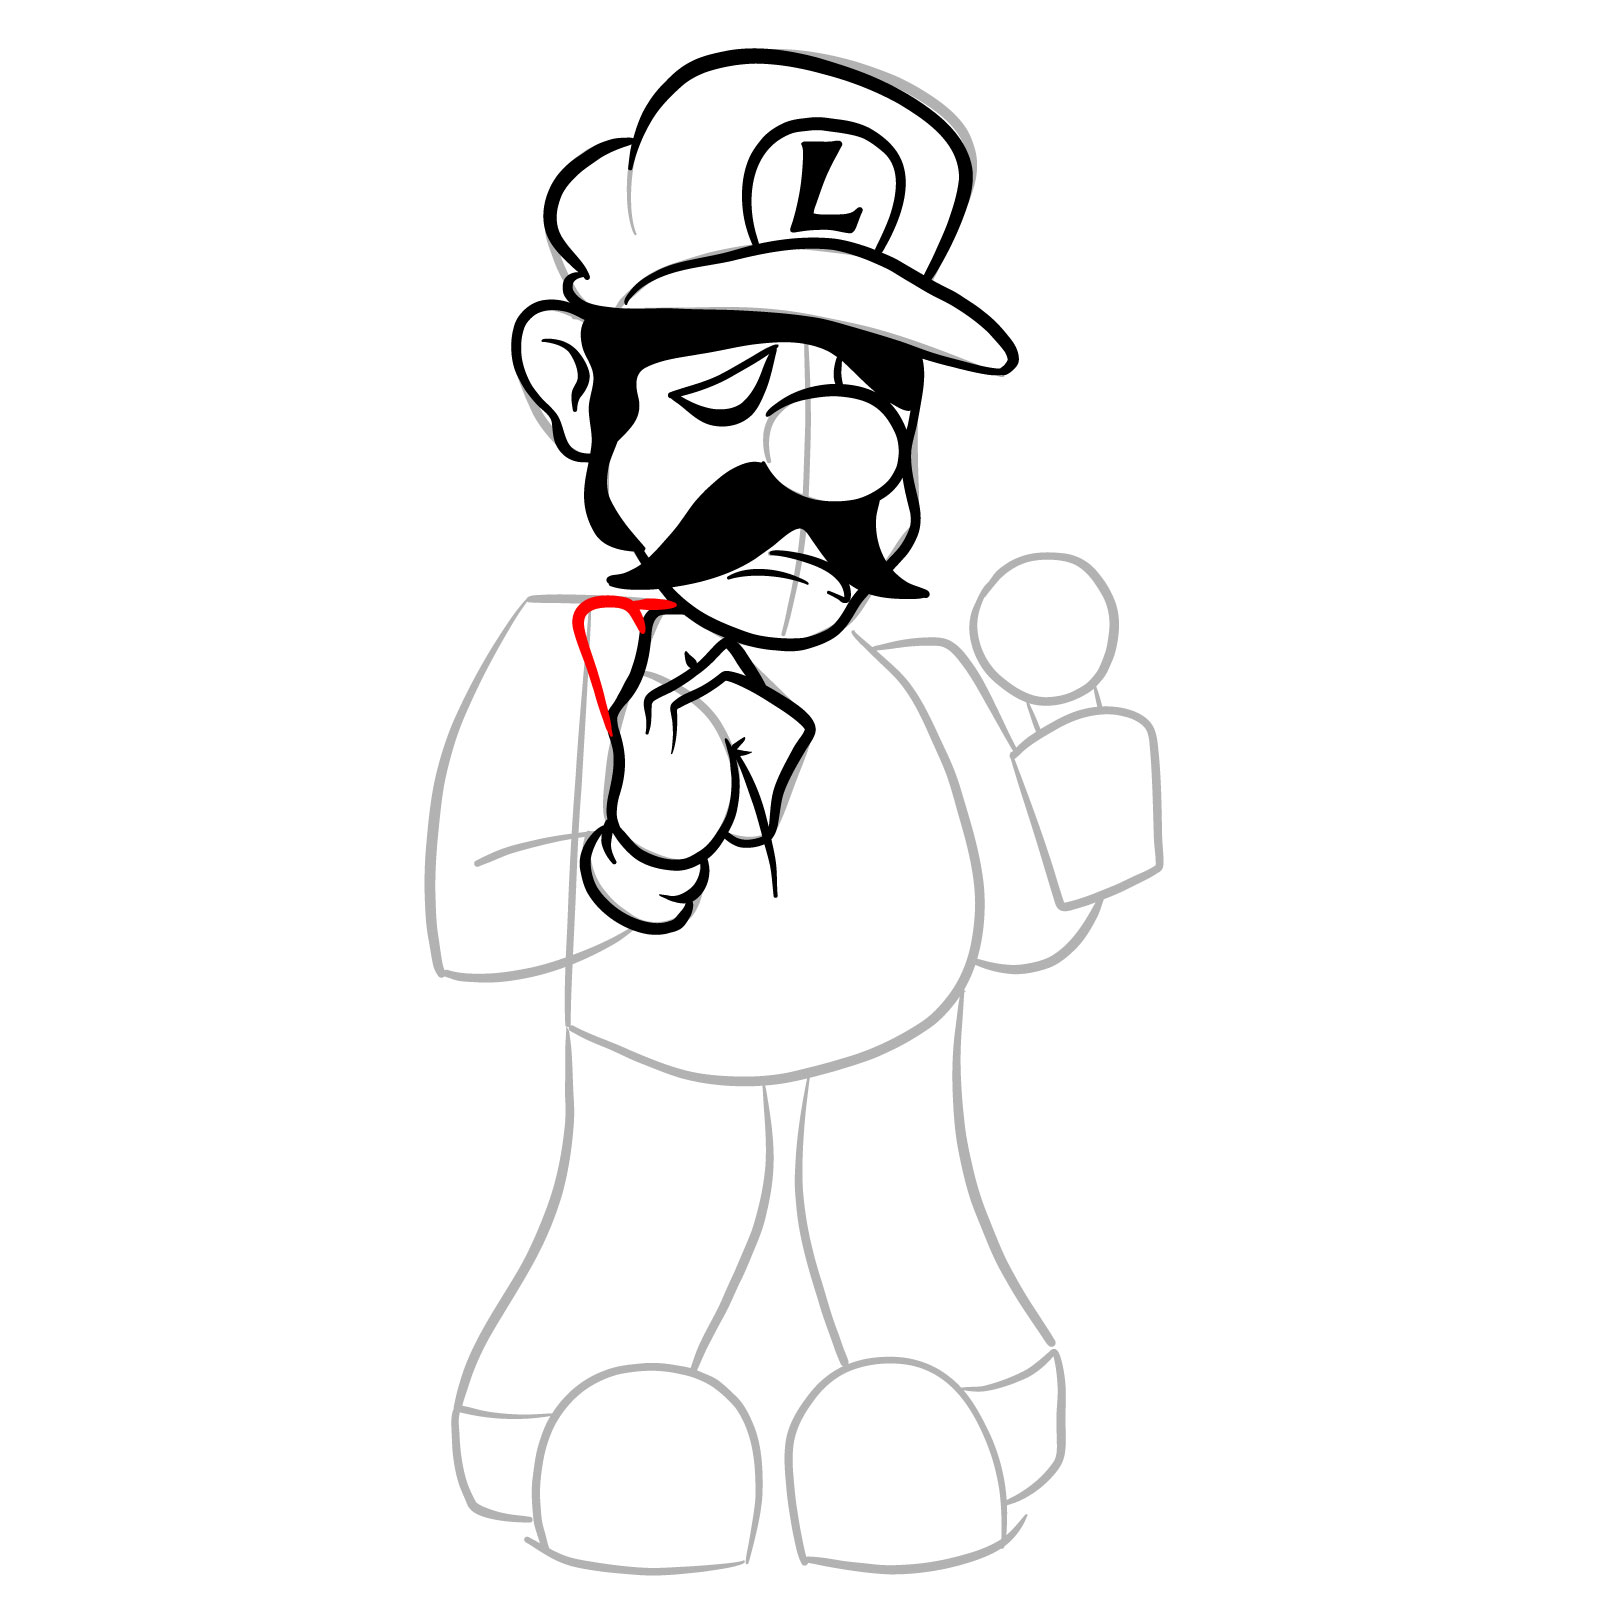 How to draw Beta Luigi from FNF - step 17